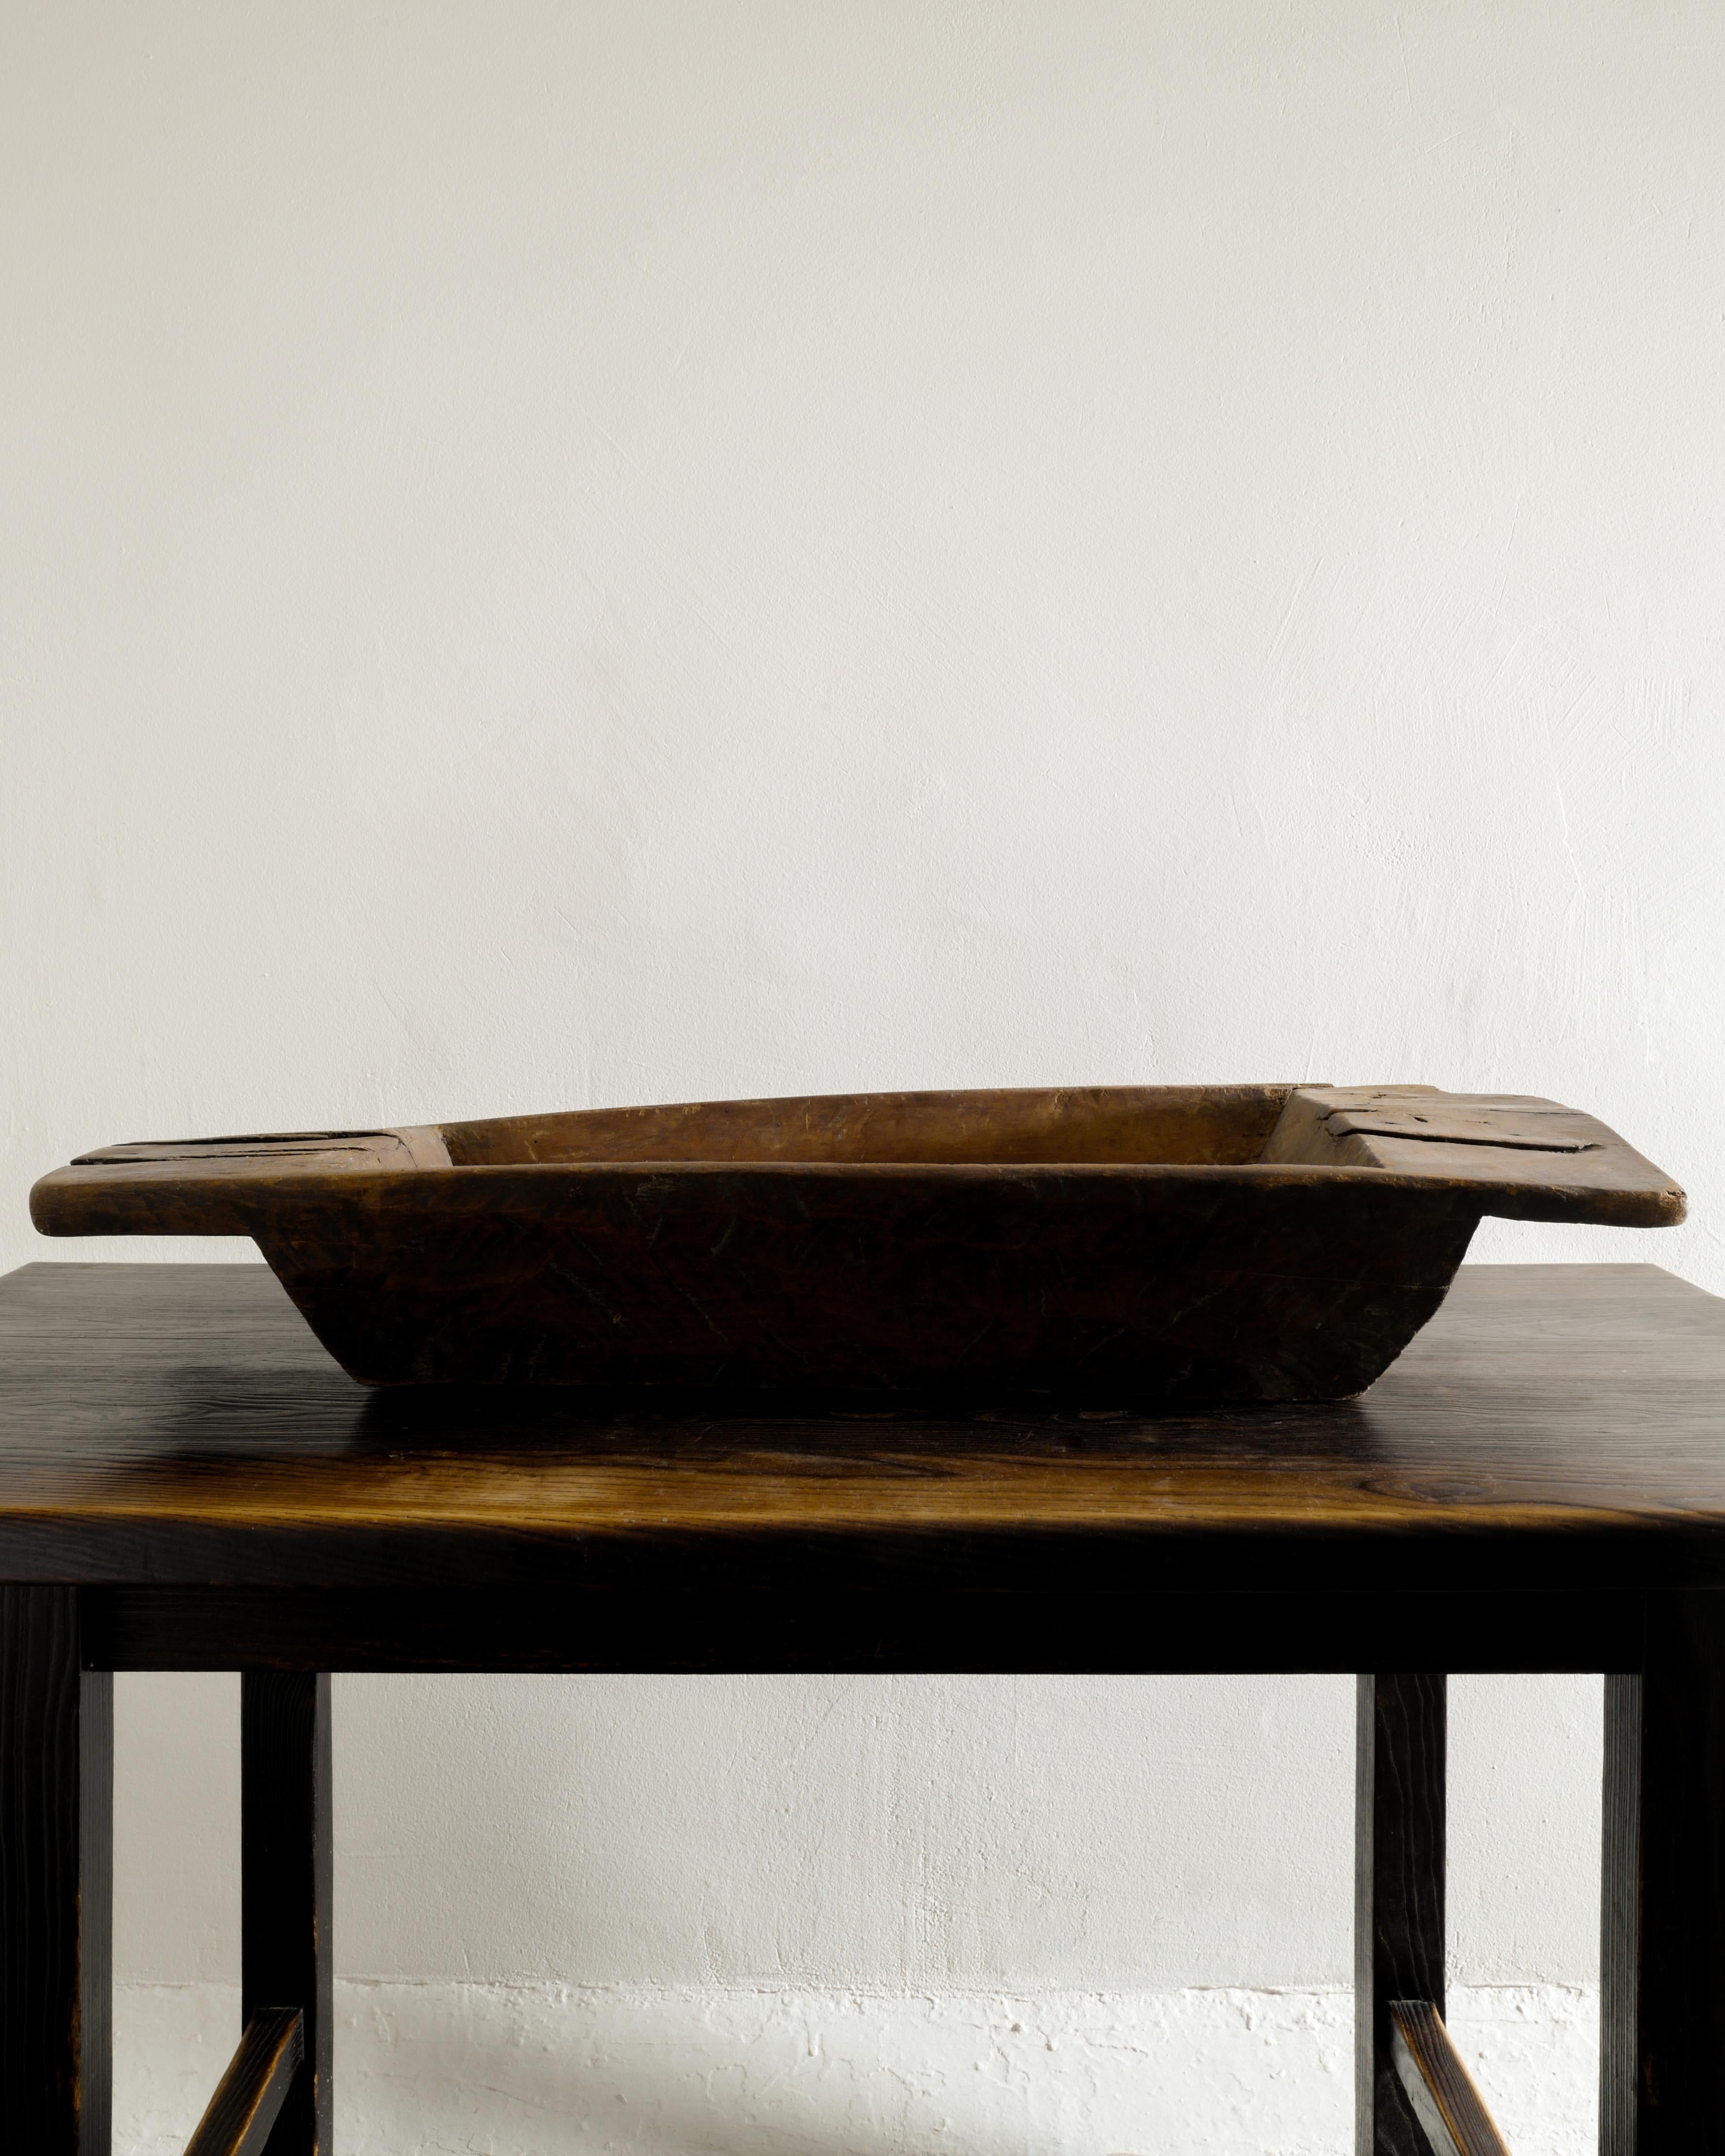 Rare antique large wooden tray in a brutalist and primitive style produced in Sweden. In good vintage condition with patina from age and use. 

Dimensions: H: 5.91 in (15 cm) W: 37.01 in (94 cm) D: 14.57 in (37 cm)